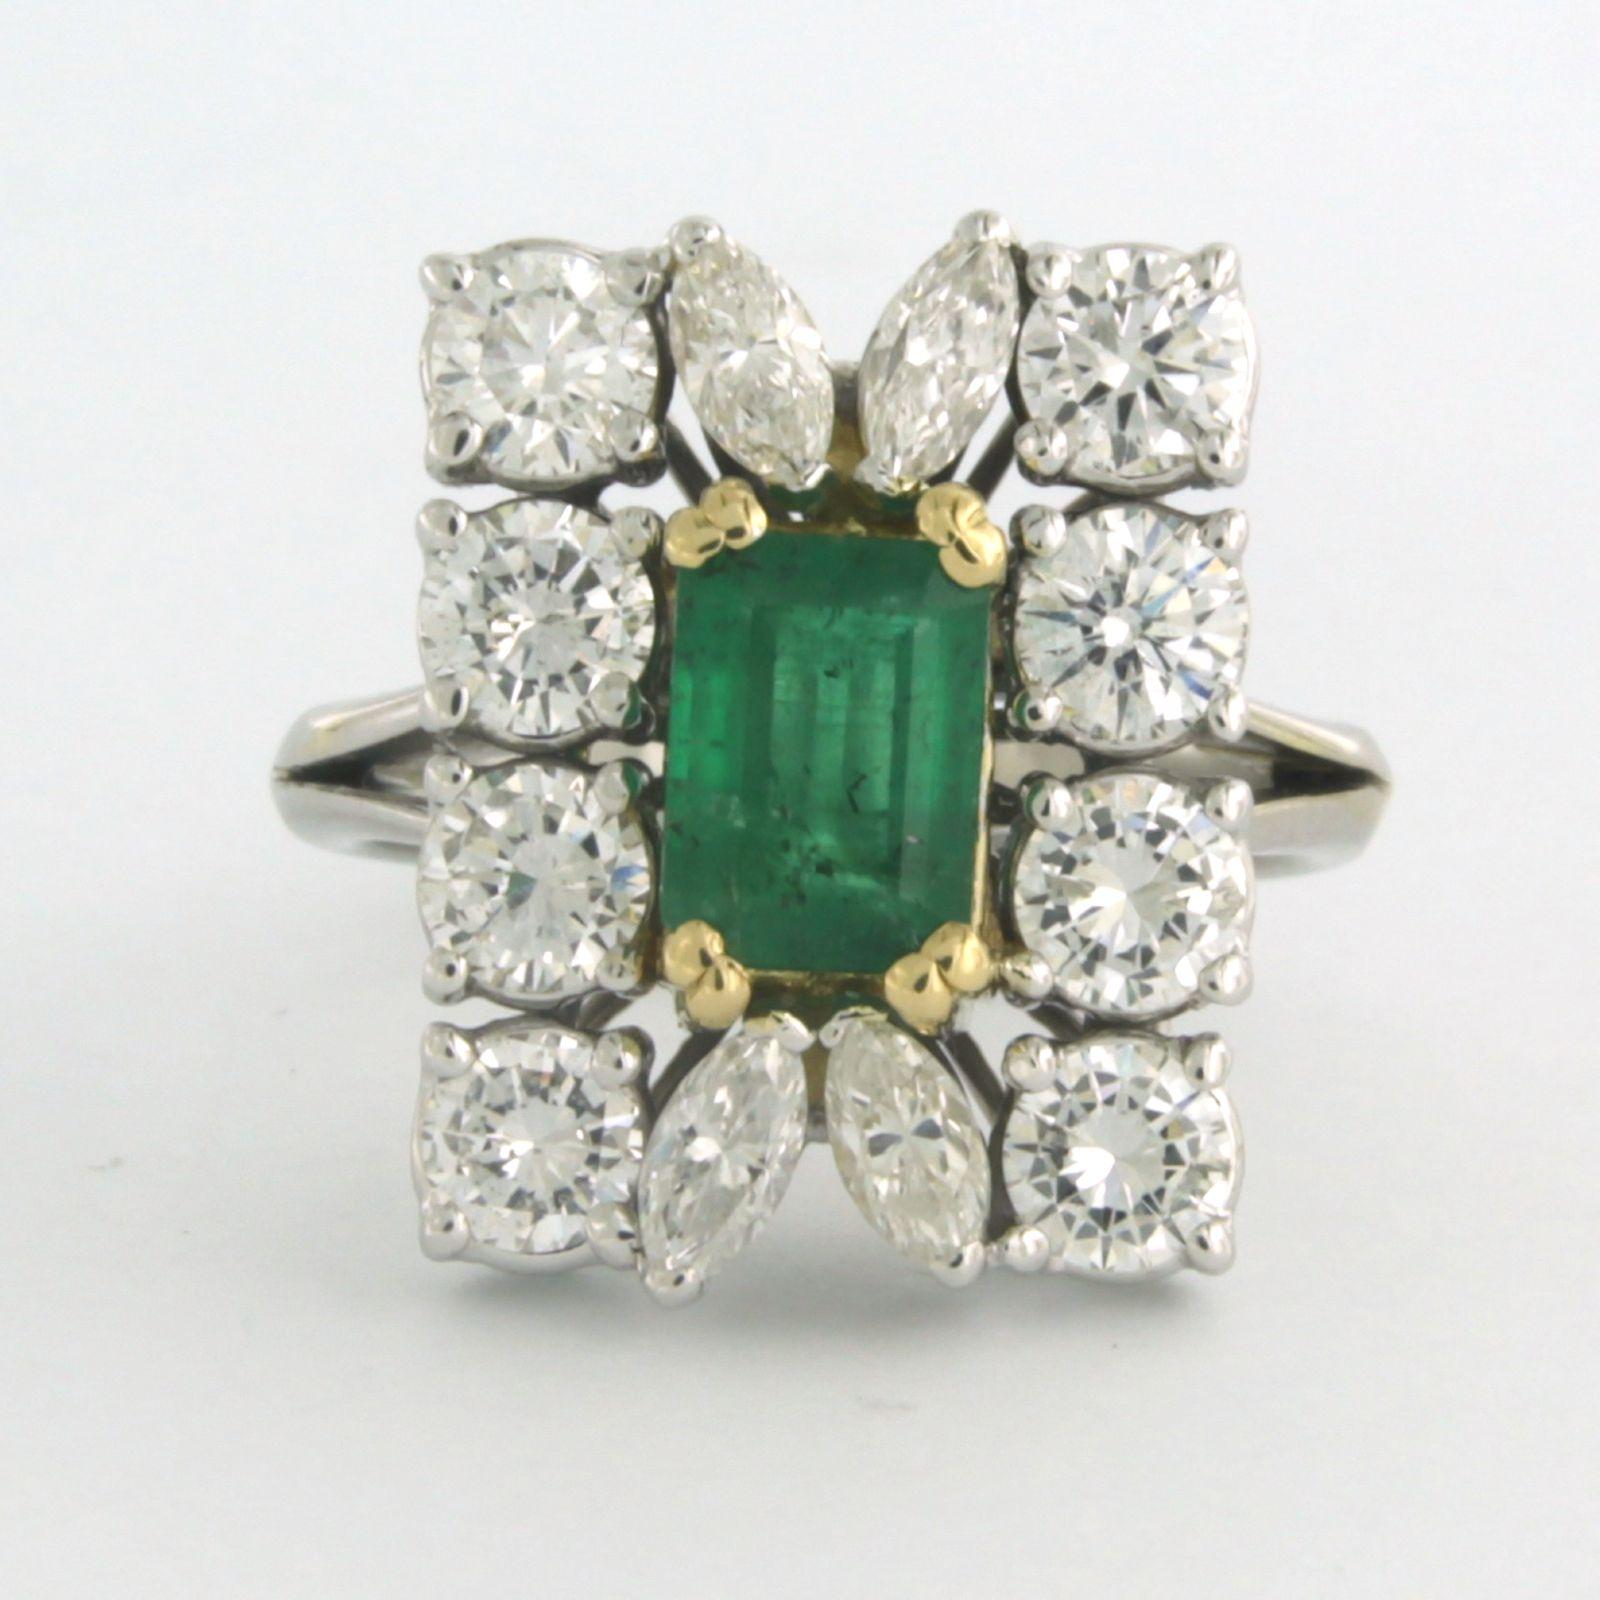 18k bicolor entourage ring set with emerald to. 1.50ct and entourage marquise and brilliant cut diamonds up to. 2.50ct - F/G - VS/SI - ring size U.S. 7.5 - EU. 17.75(56)

detailed description:

The top of the ring is in a rectangle shape measuring